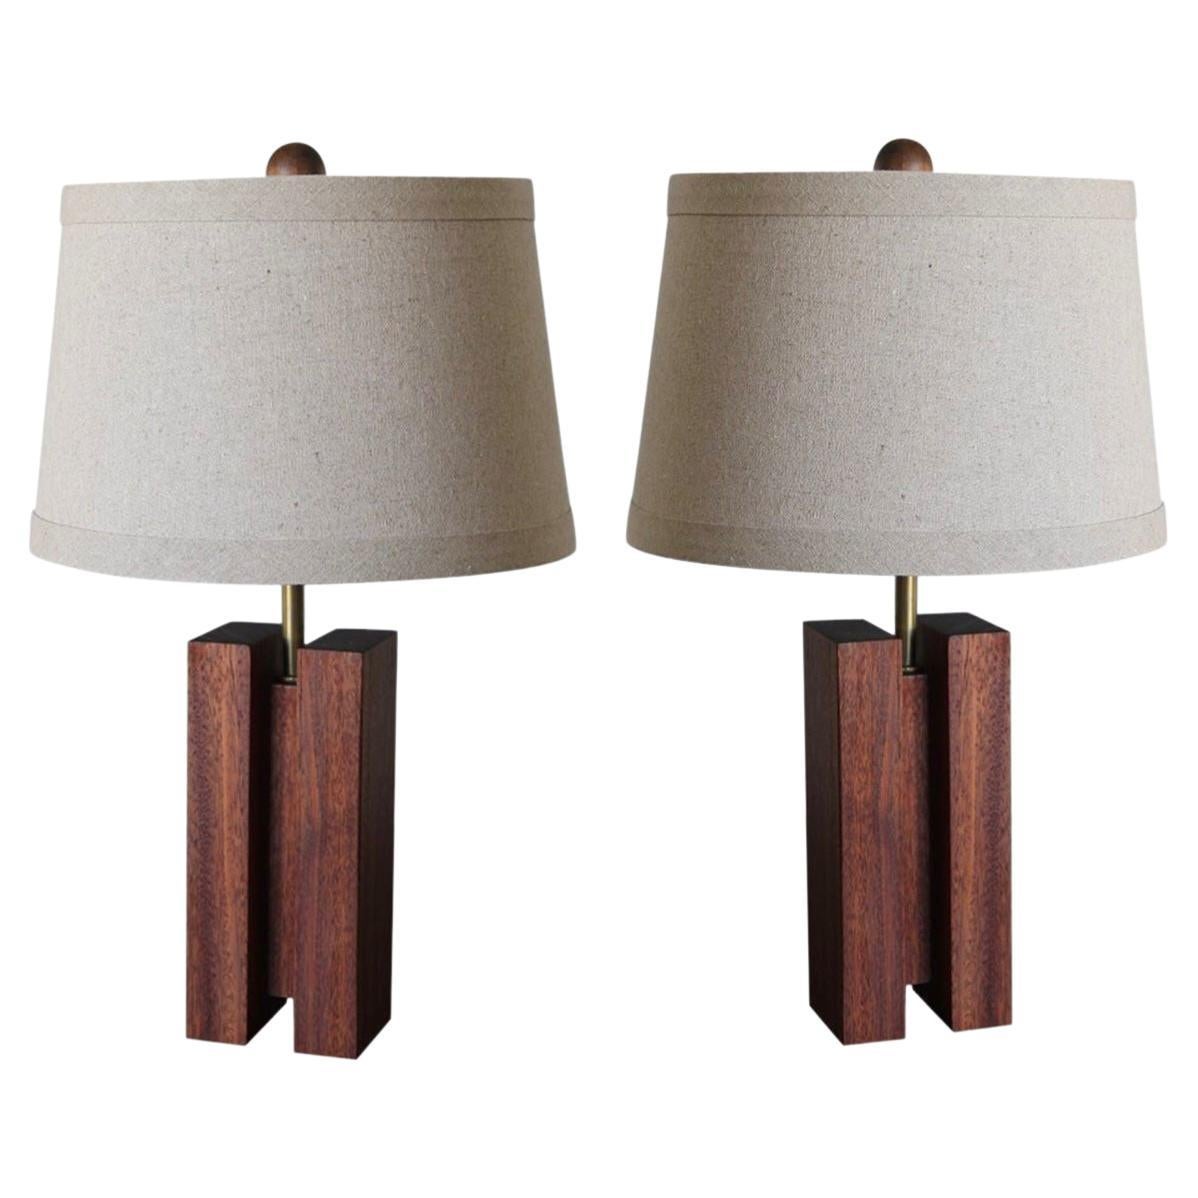 Pair of Chic ‘Cubismo’ Lamp with linen shade by Understated Design For Sale